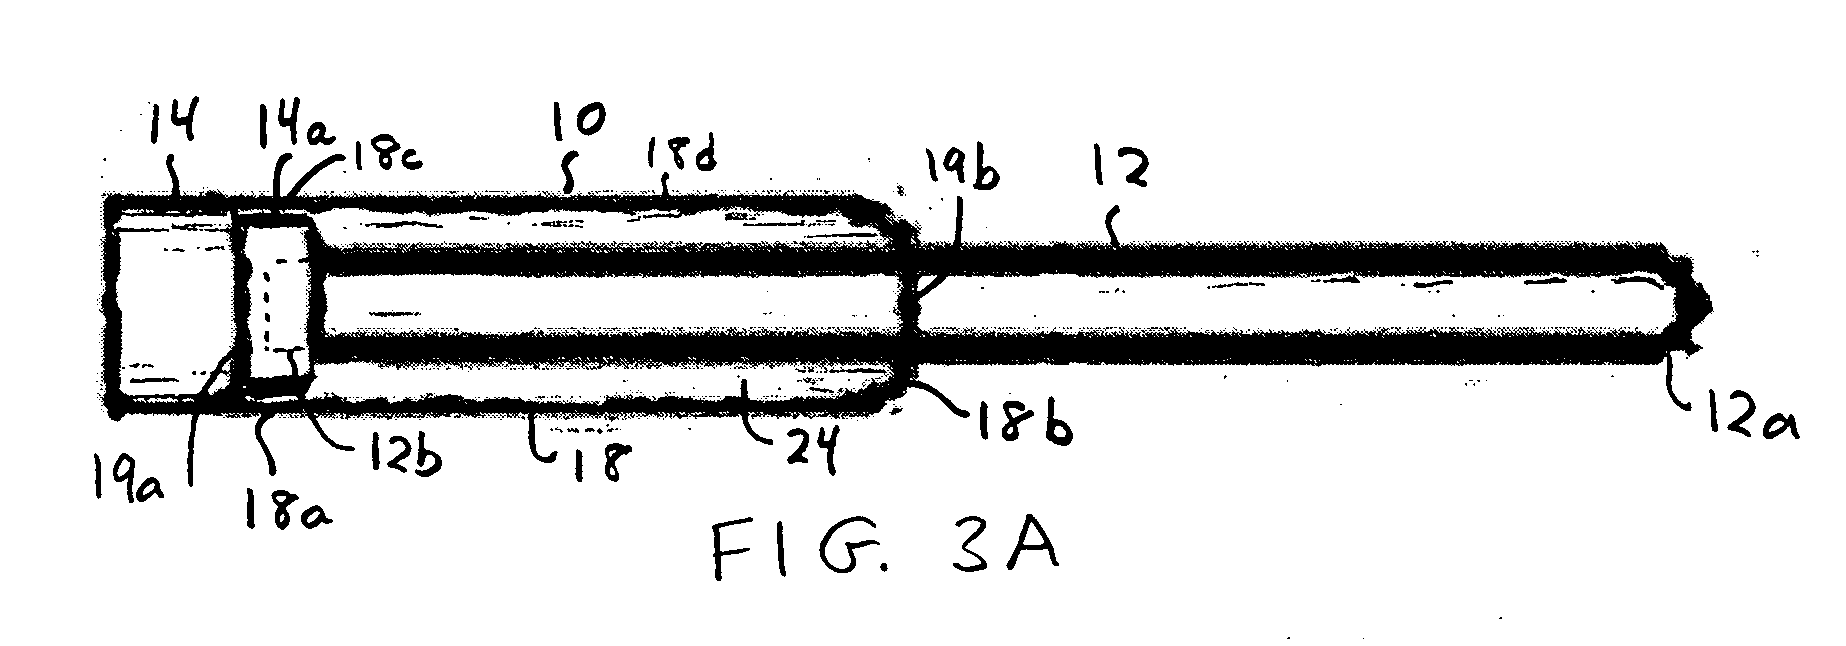 Adapter for attaching information to test tubes